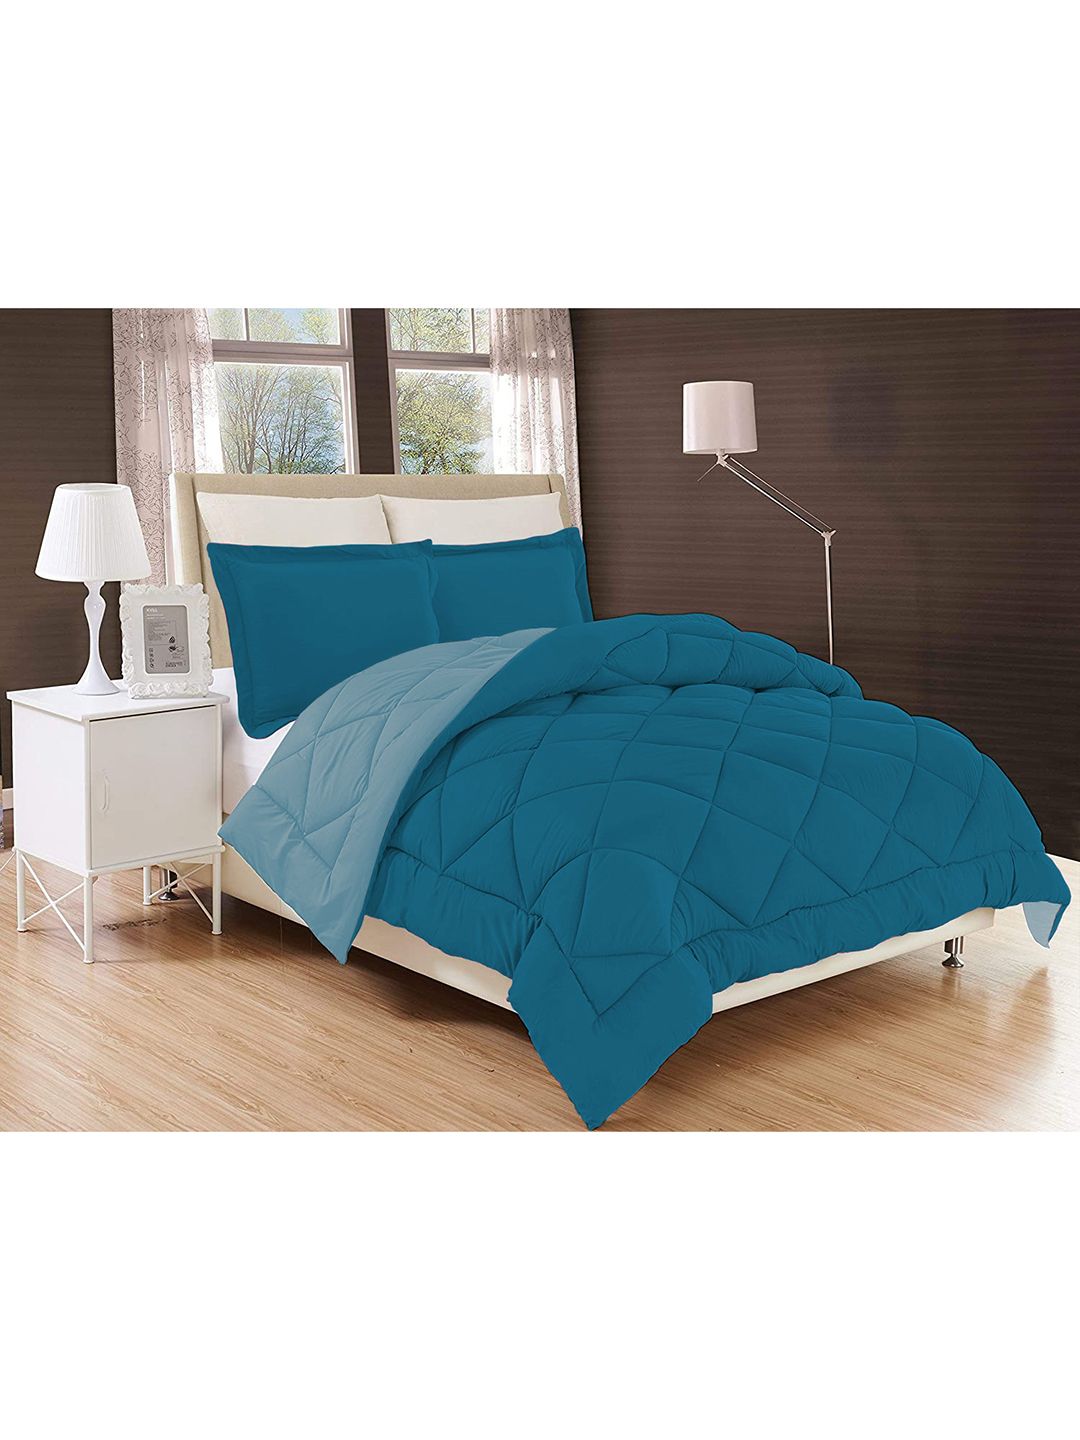 Sasimo Teal Blue Solid 210 GSM AC Room Double Bed Comforter Price in India